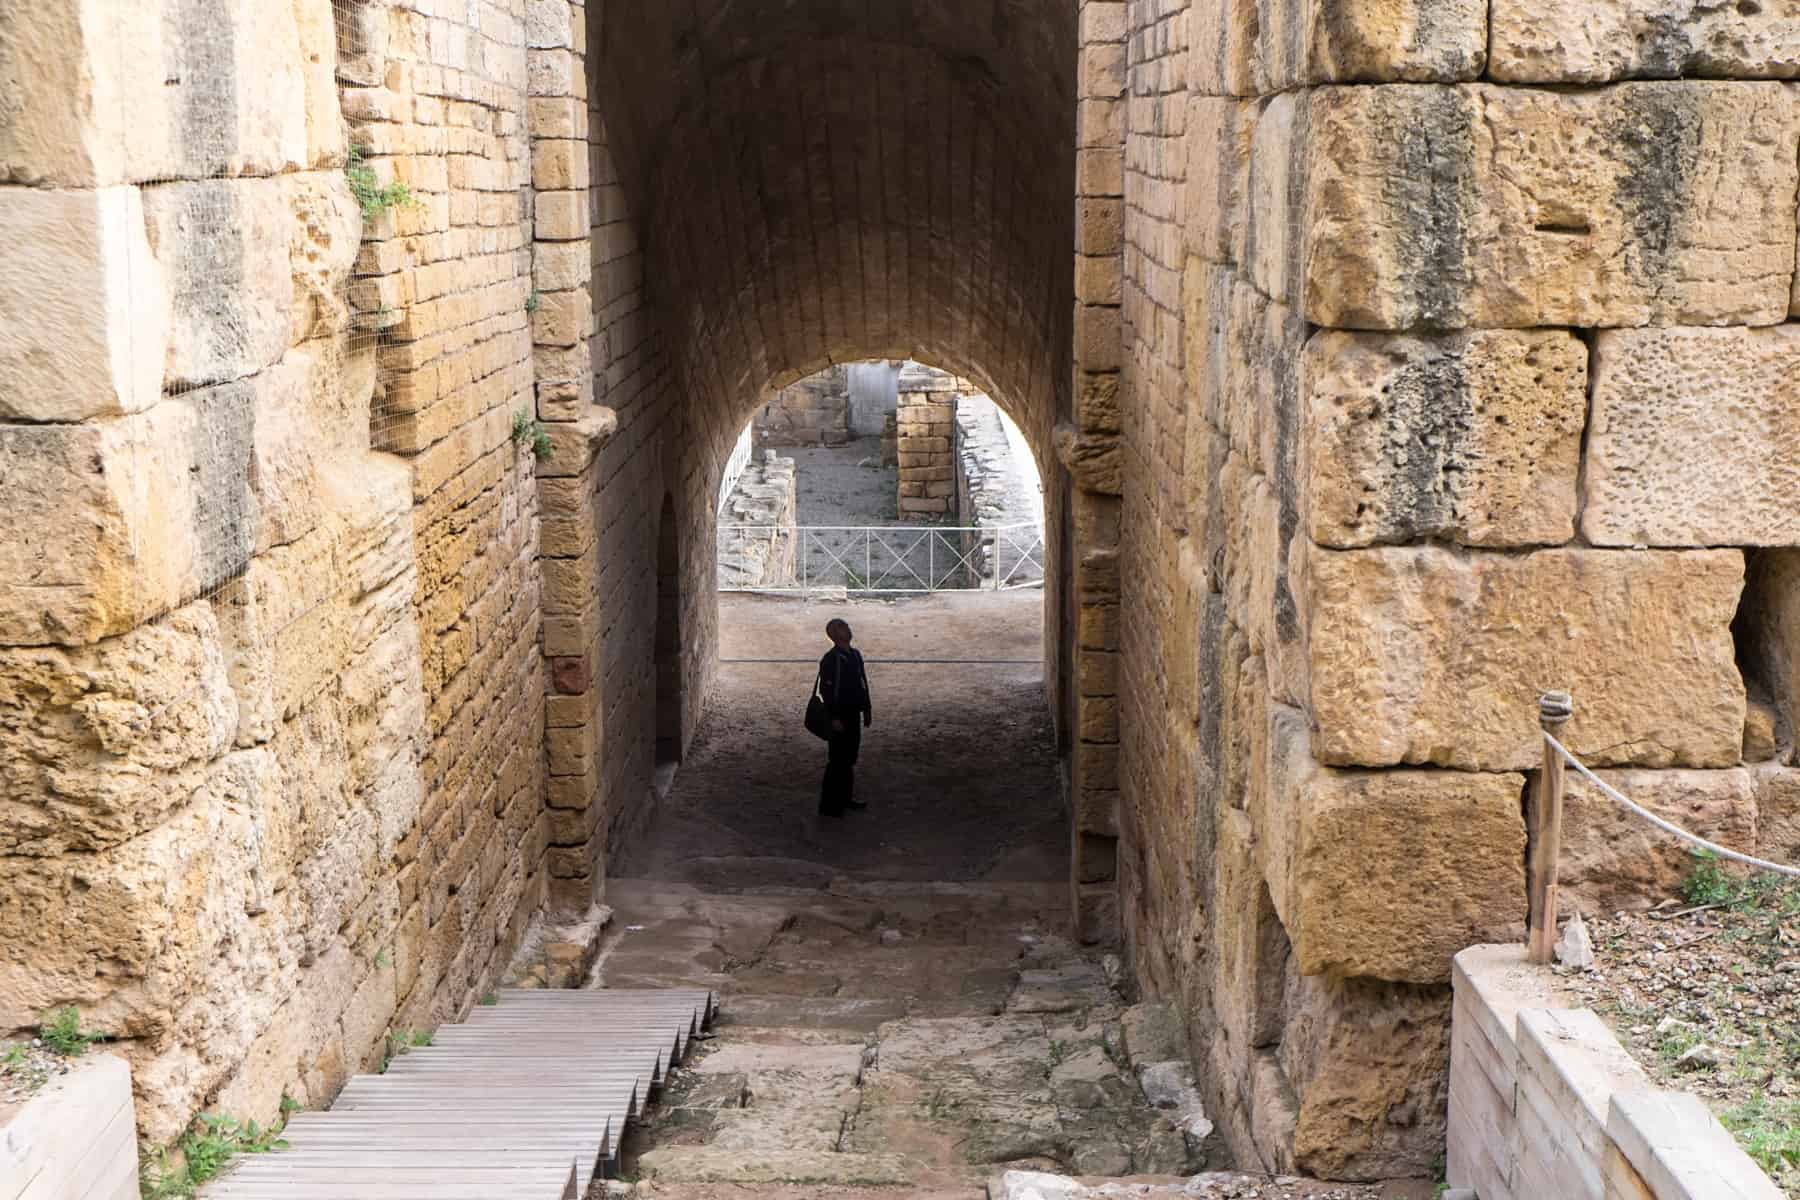 A man stands in the high stone doorway entrance of the yellowing stoned Roman Tarragona Amphitheatre in Spain